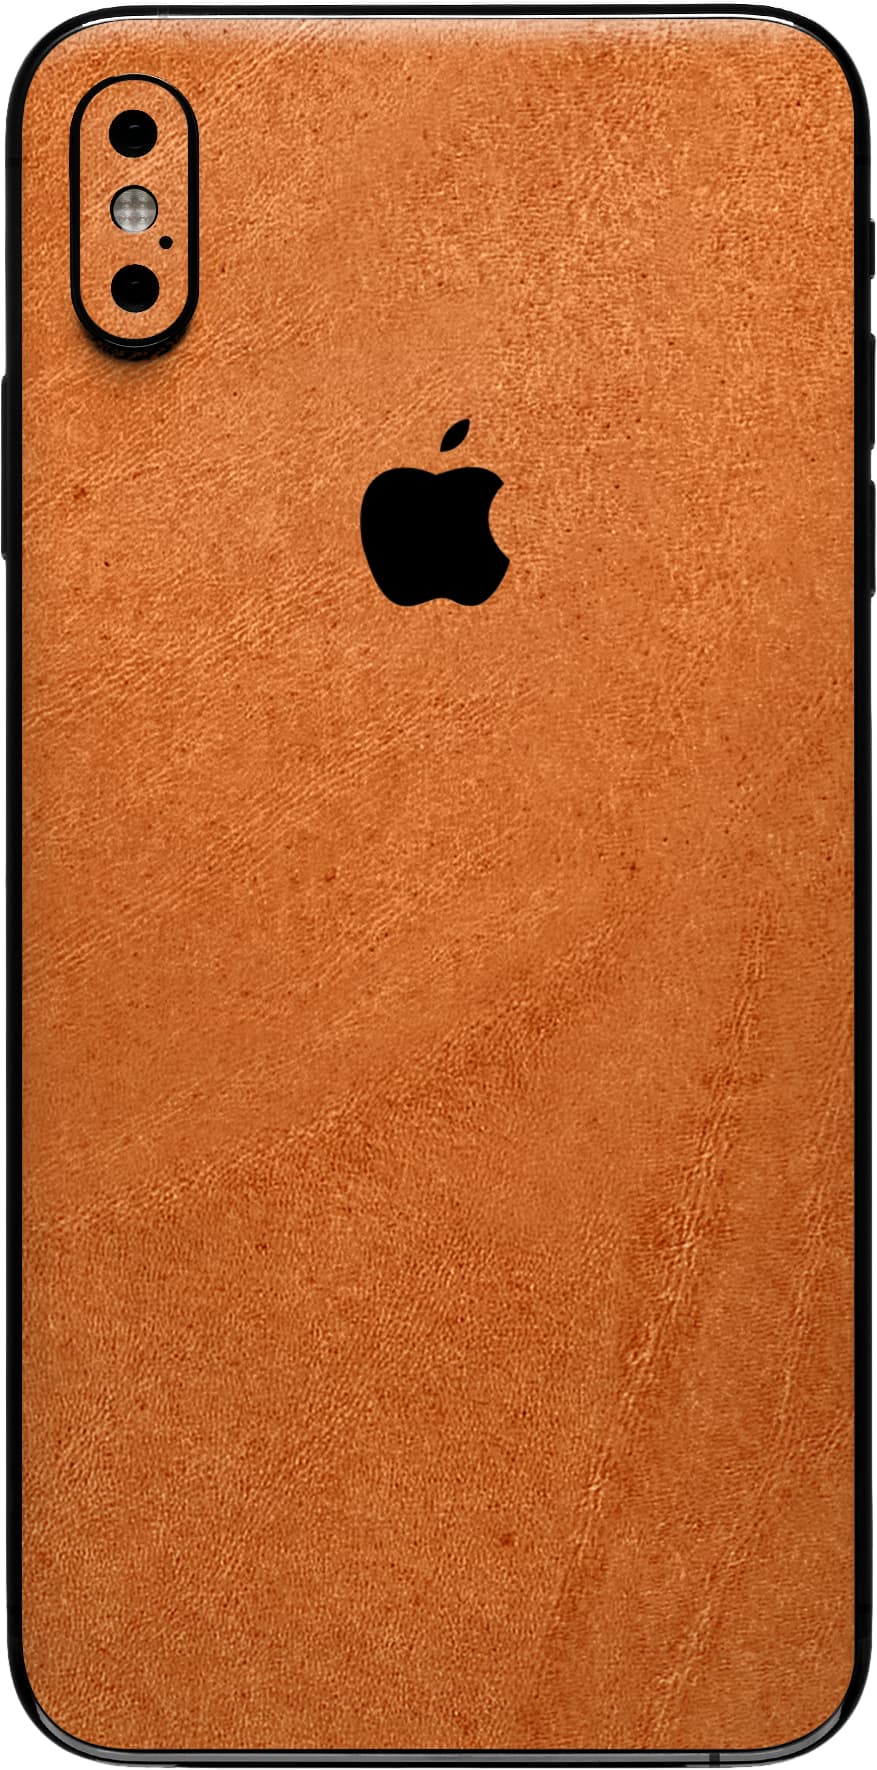 iPhone XS Max Skins, Wraps & Covers » dbrand